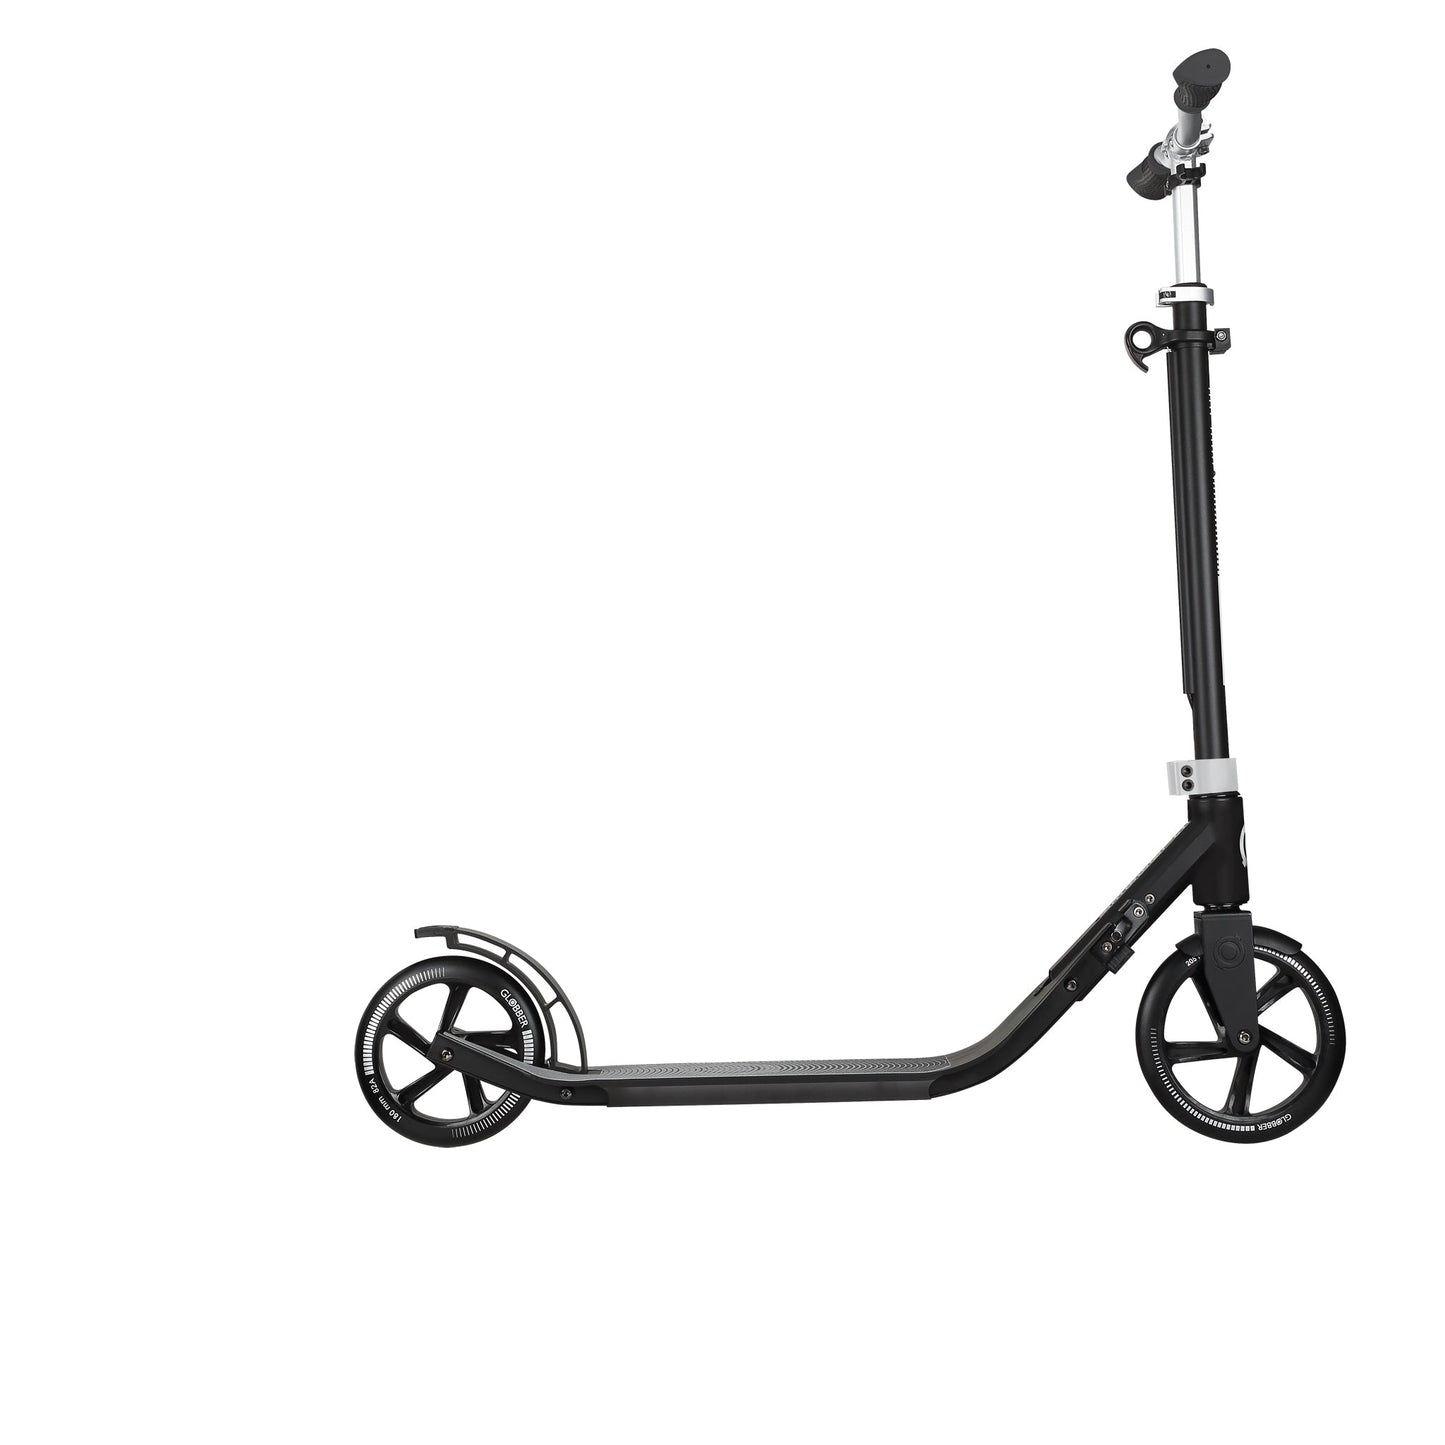 One NL 205-180 Duo: Adjustable 1-Second Folding Scooter for Adults - Lead Grey